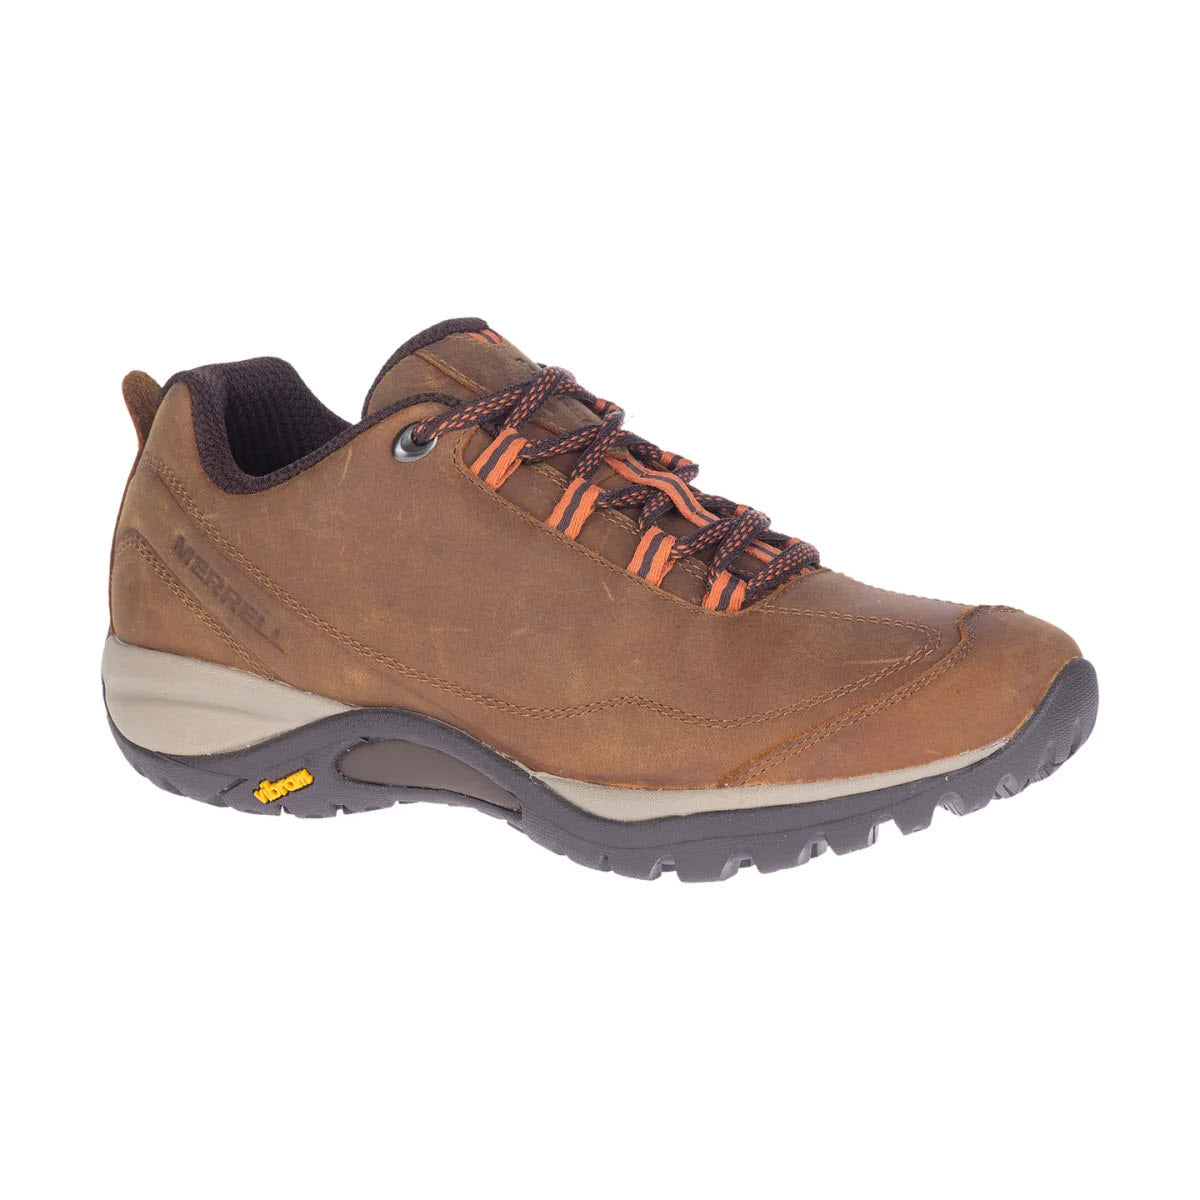 A single Merrell Siren Traveller 3 Tan women&#39;s hiking shoe with orange laces and a Vibram sole, displayed against a white background.